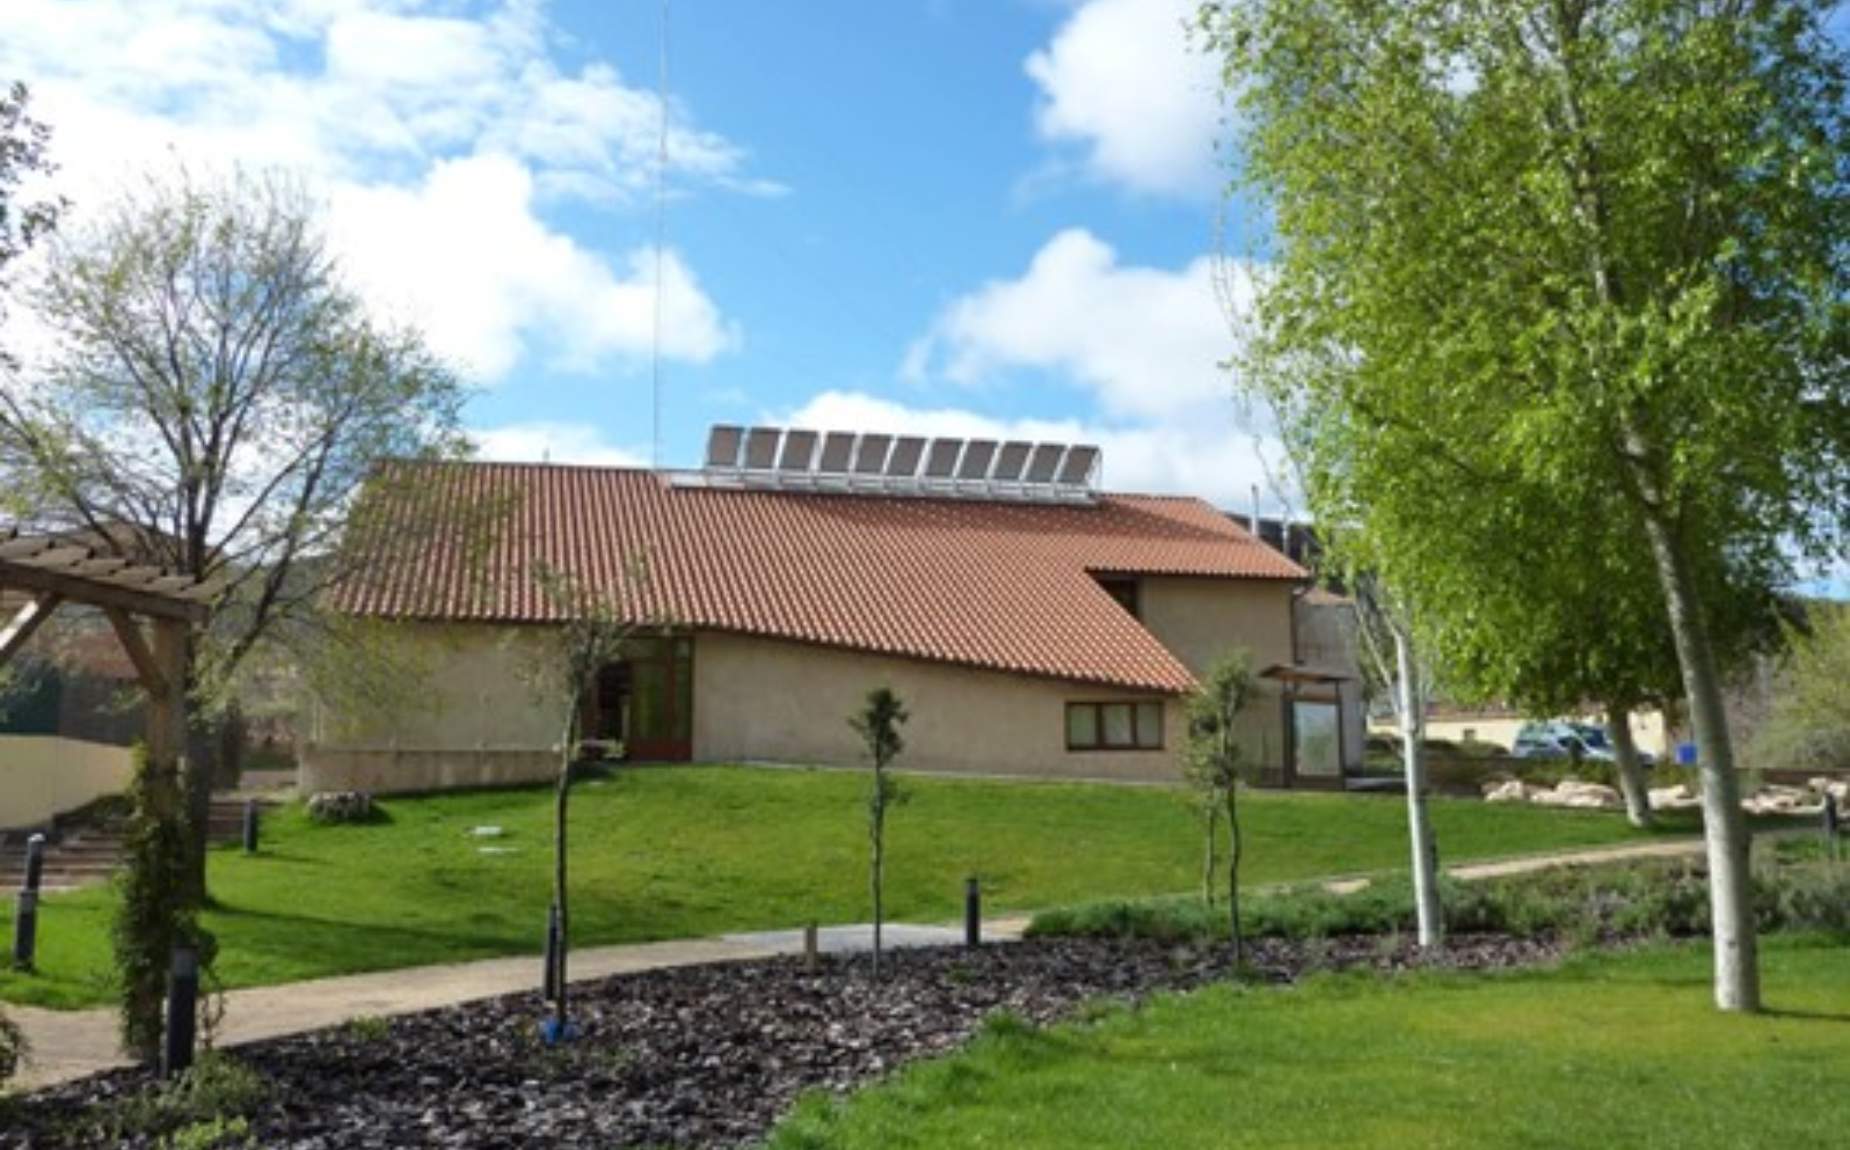 A rural house with solar panels on the roof.